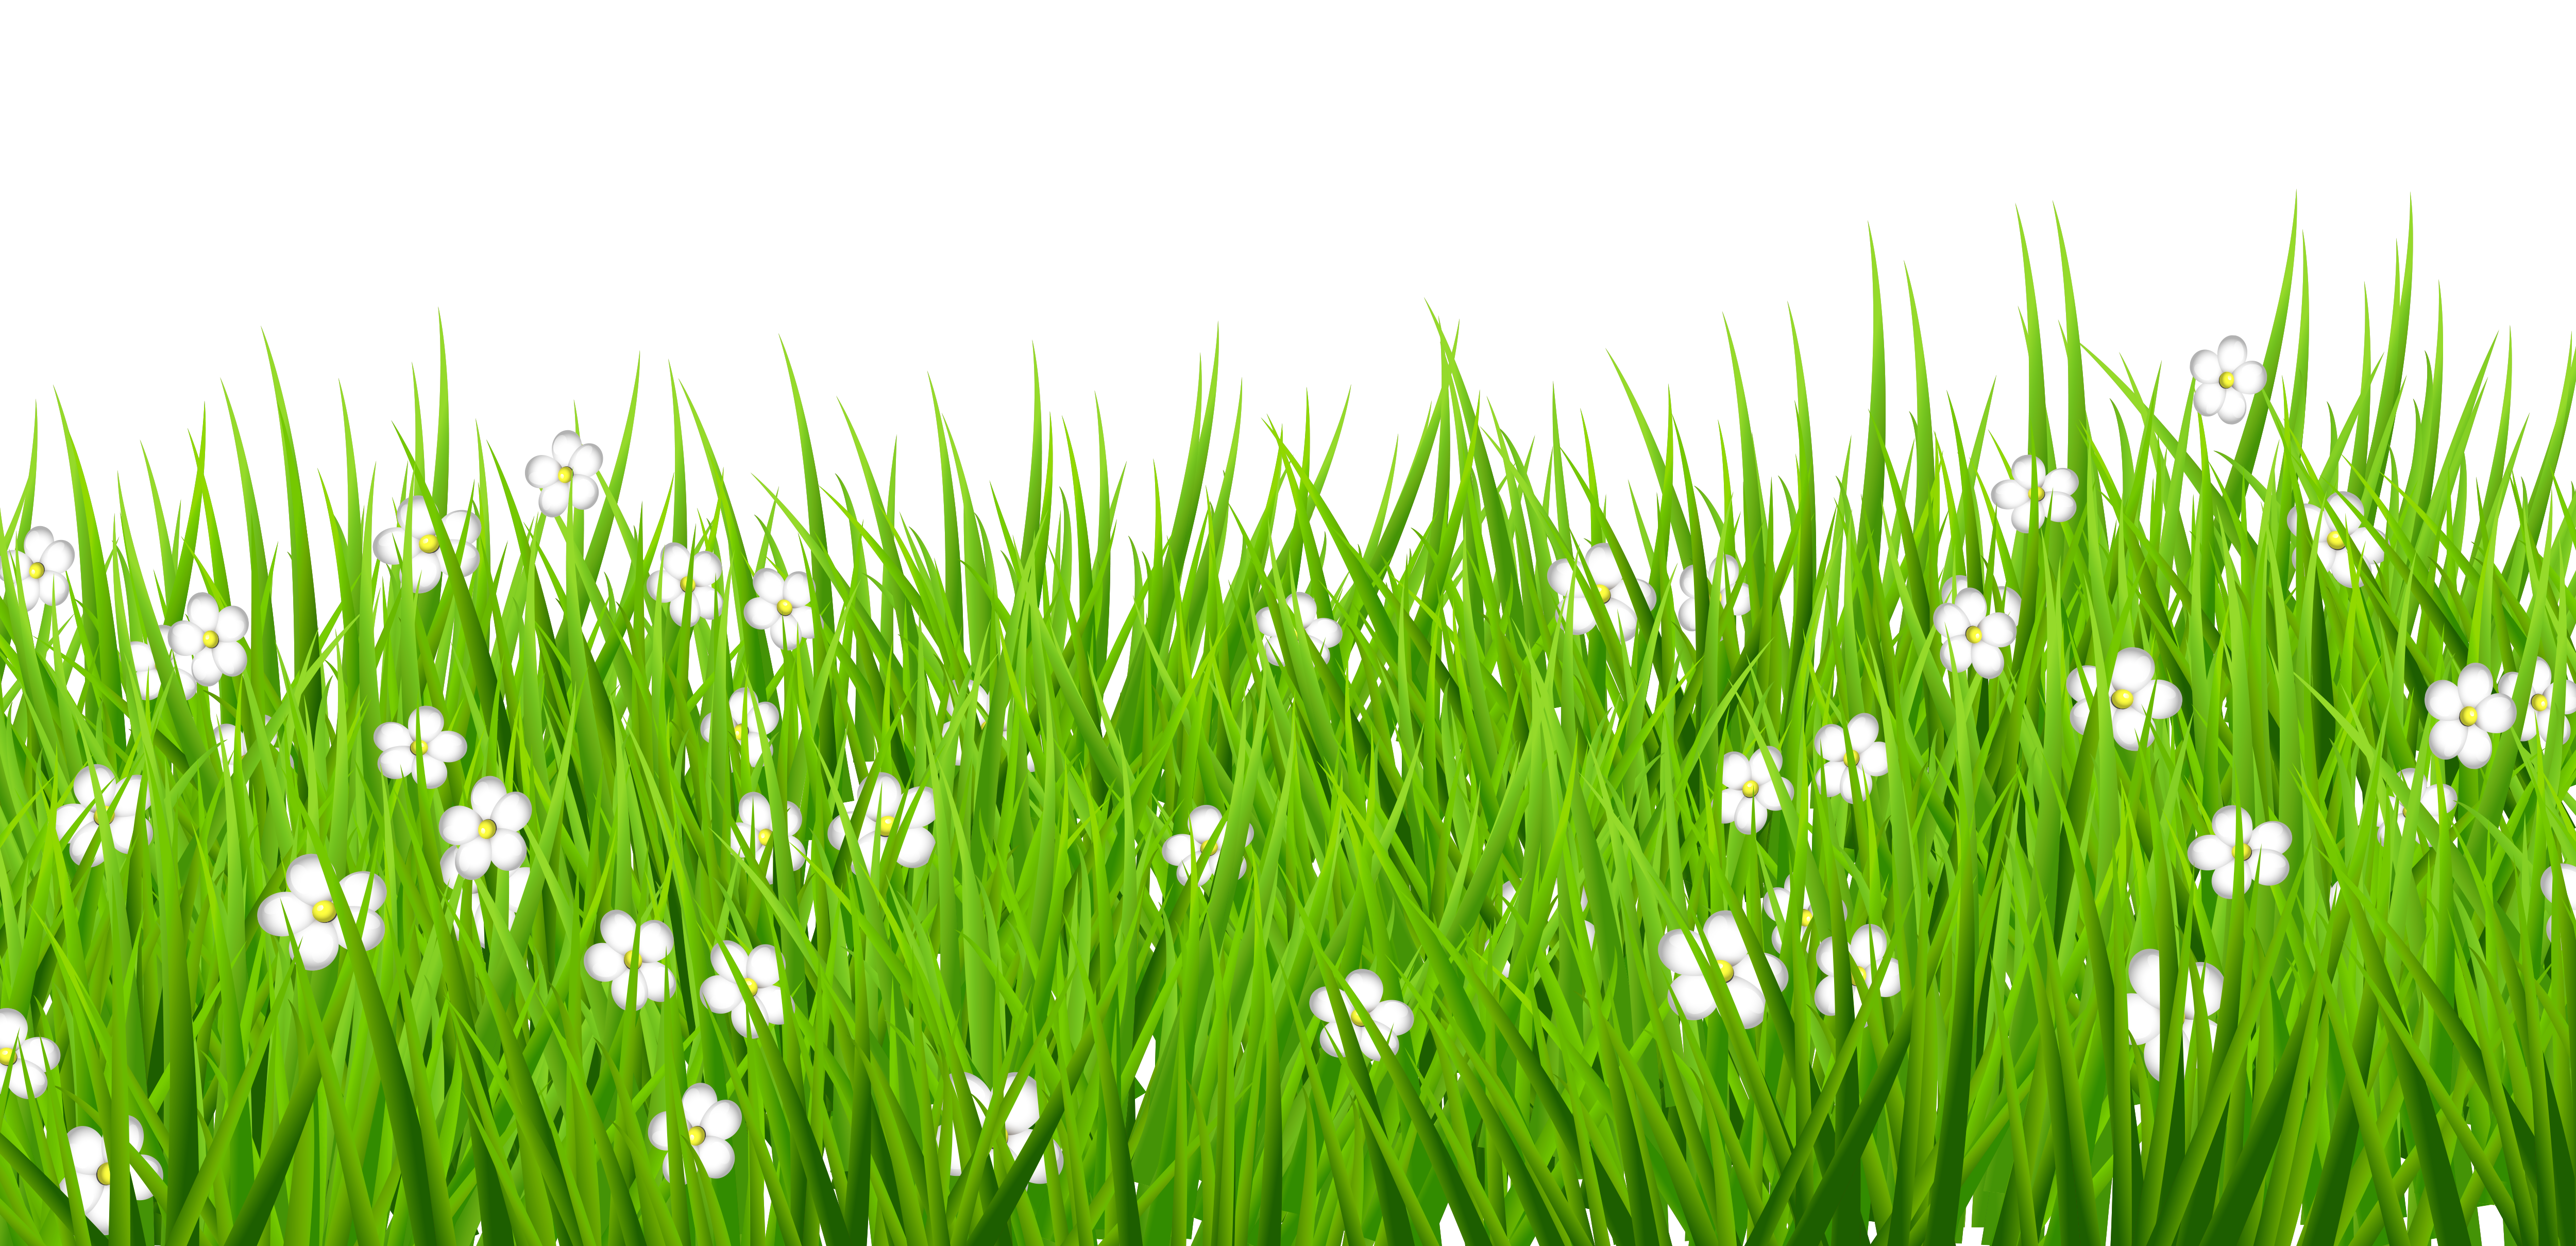 Transparent_Grass_with_White_Flowers_Clipart.png?m=1399672800